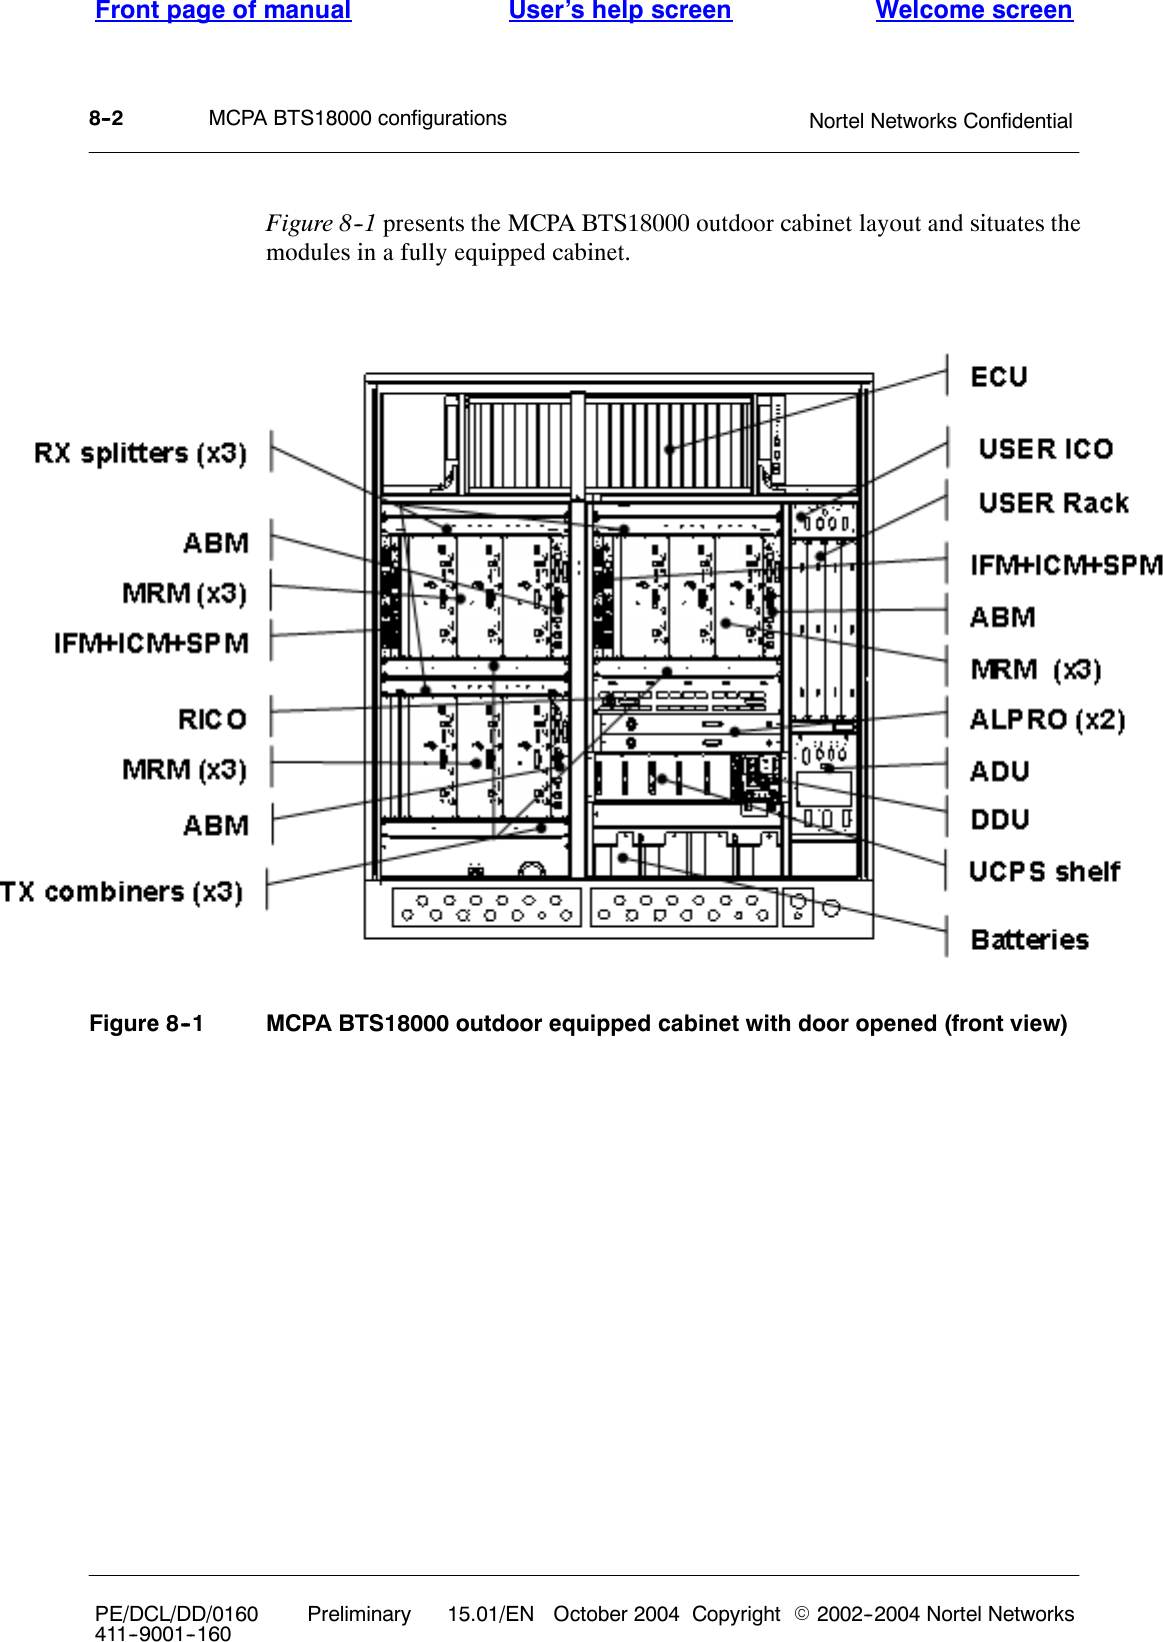 MCPA BTS18000 configurationsFront page of manual Welcome screenUser’s help screenNortel Networks Confidential8--2PE/DCL/DD/0160411--9001--160Preliminary 15.01/EN October 2004 Copyright E2002--2004 Nortel NetworksFigure 8--1 presents the MCPA BTS18000 outdoor cabinet layout and situates themodules in a fully equipped cabinet.Figure 8--1 MCPA BTS18000 outdoor equipped cabinet with door opened (front view)